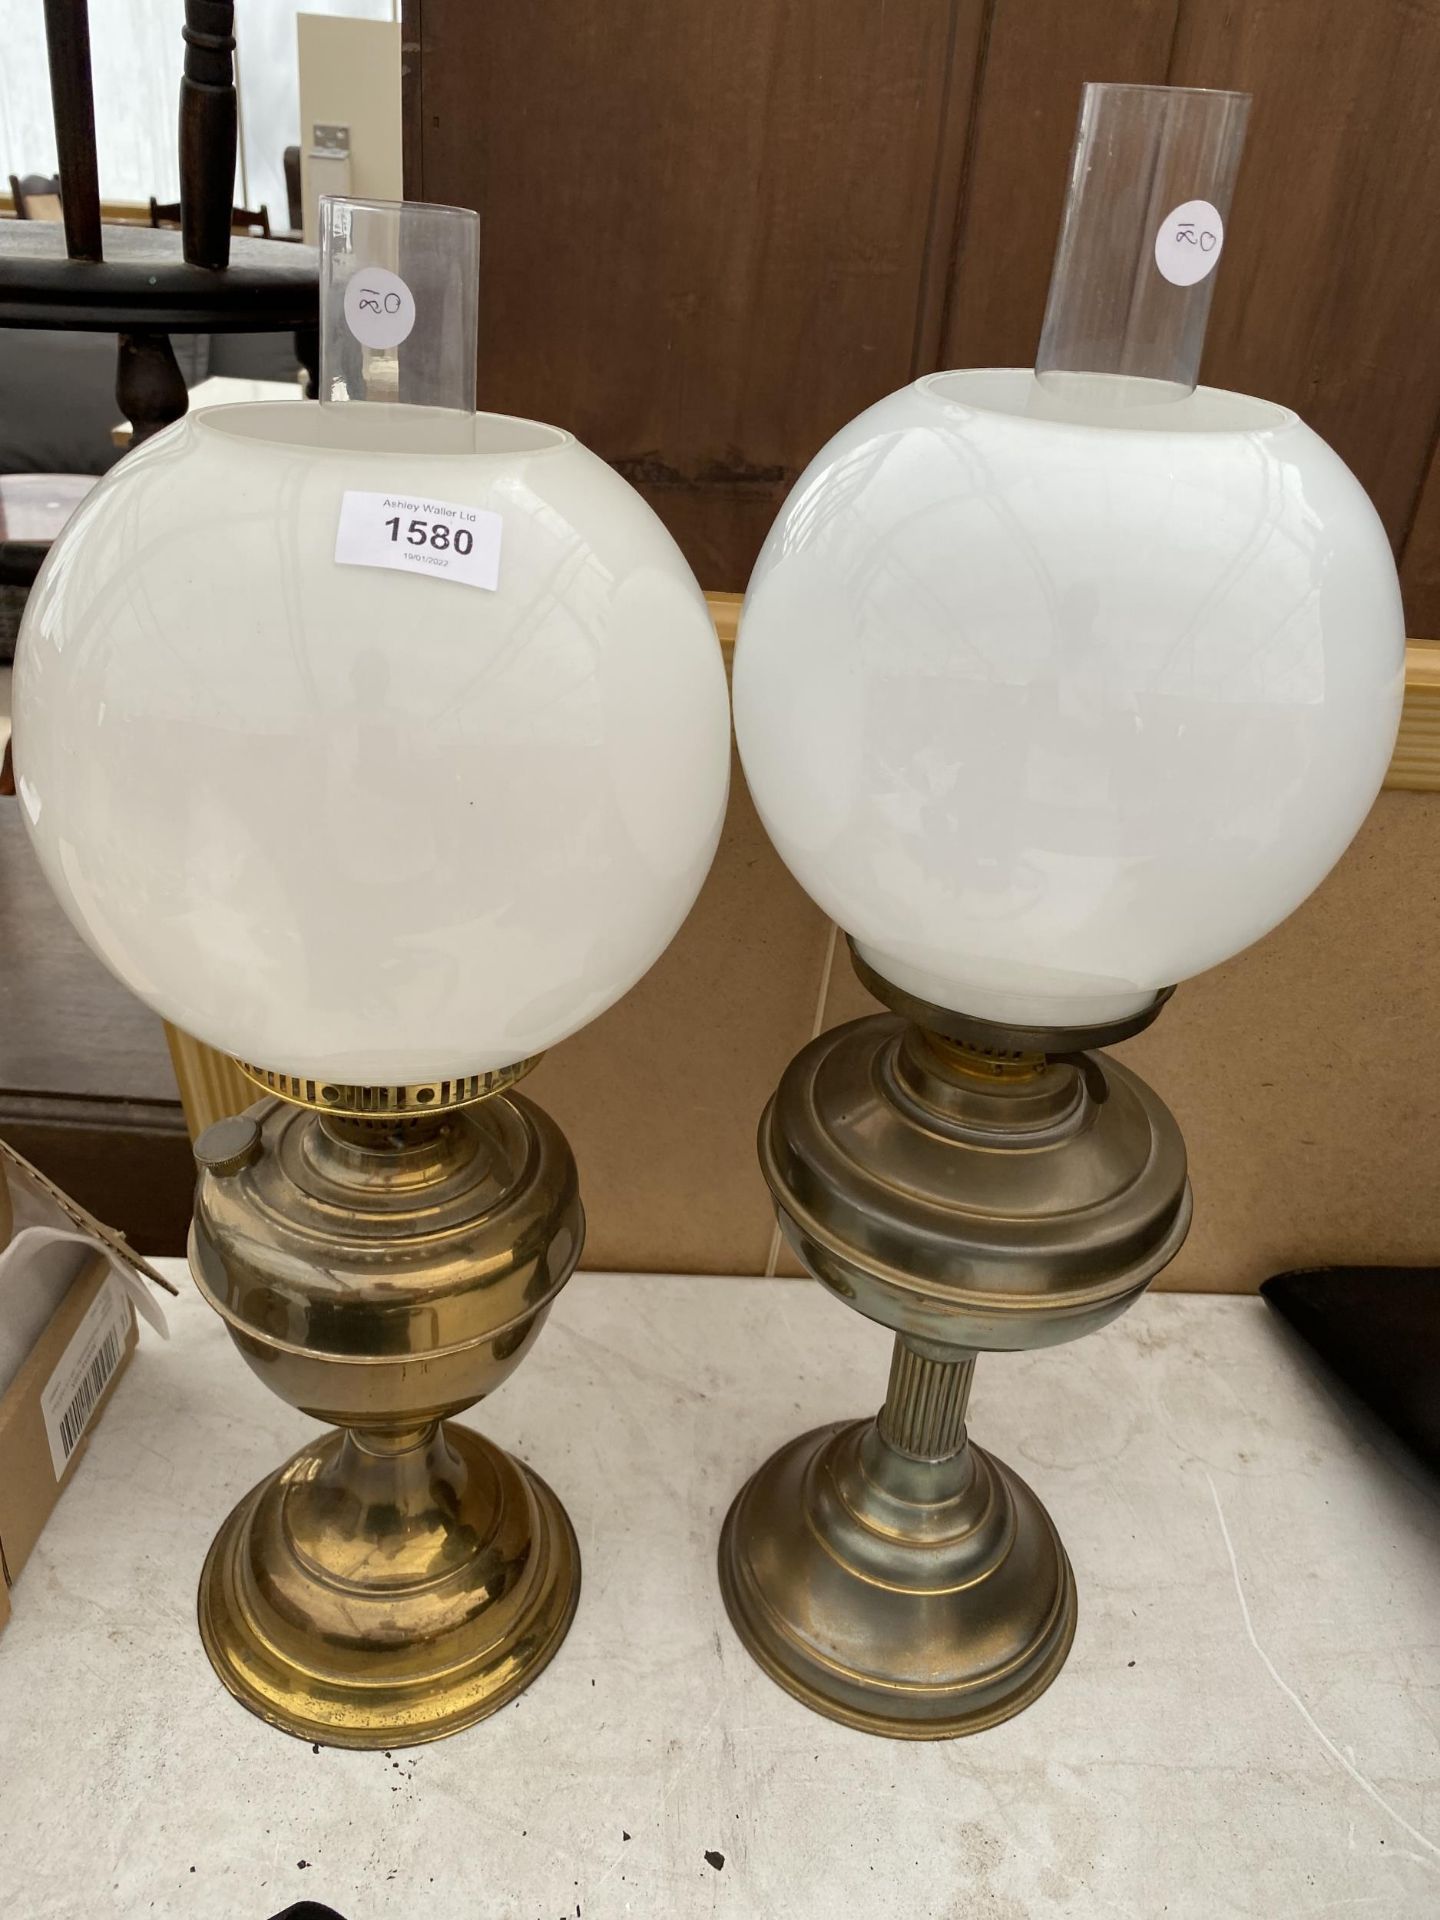 A NEAR PAIR OF BRASS OIL LAMPS WITH GLASS SHADES